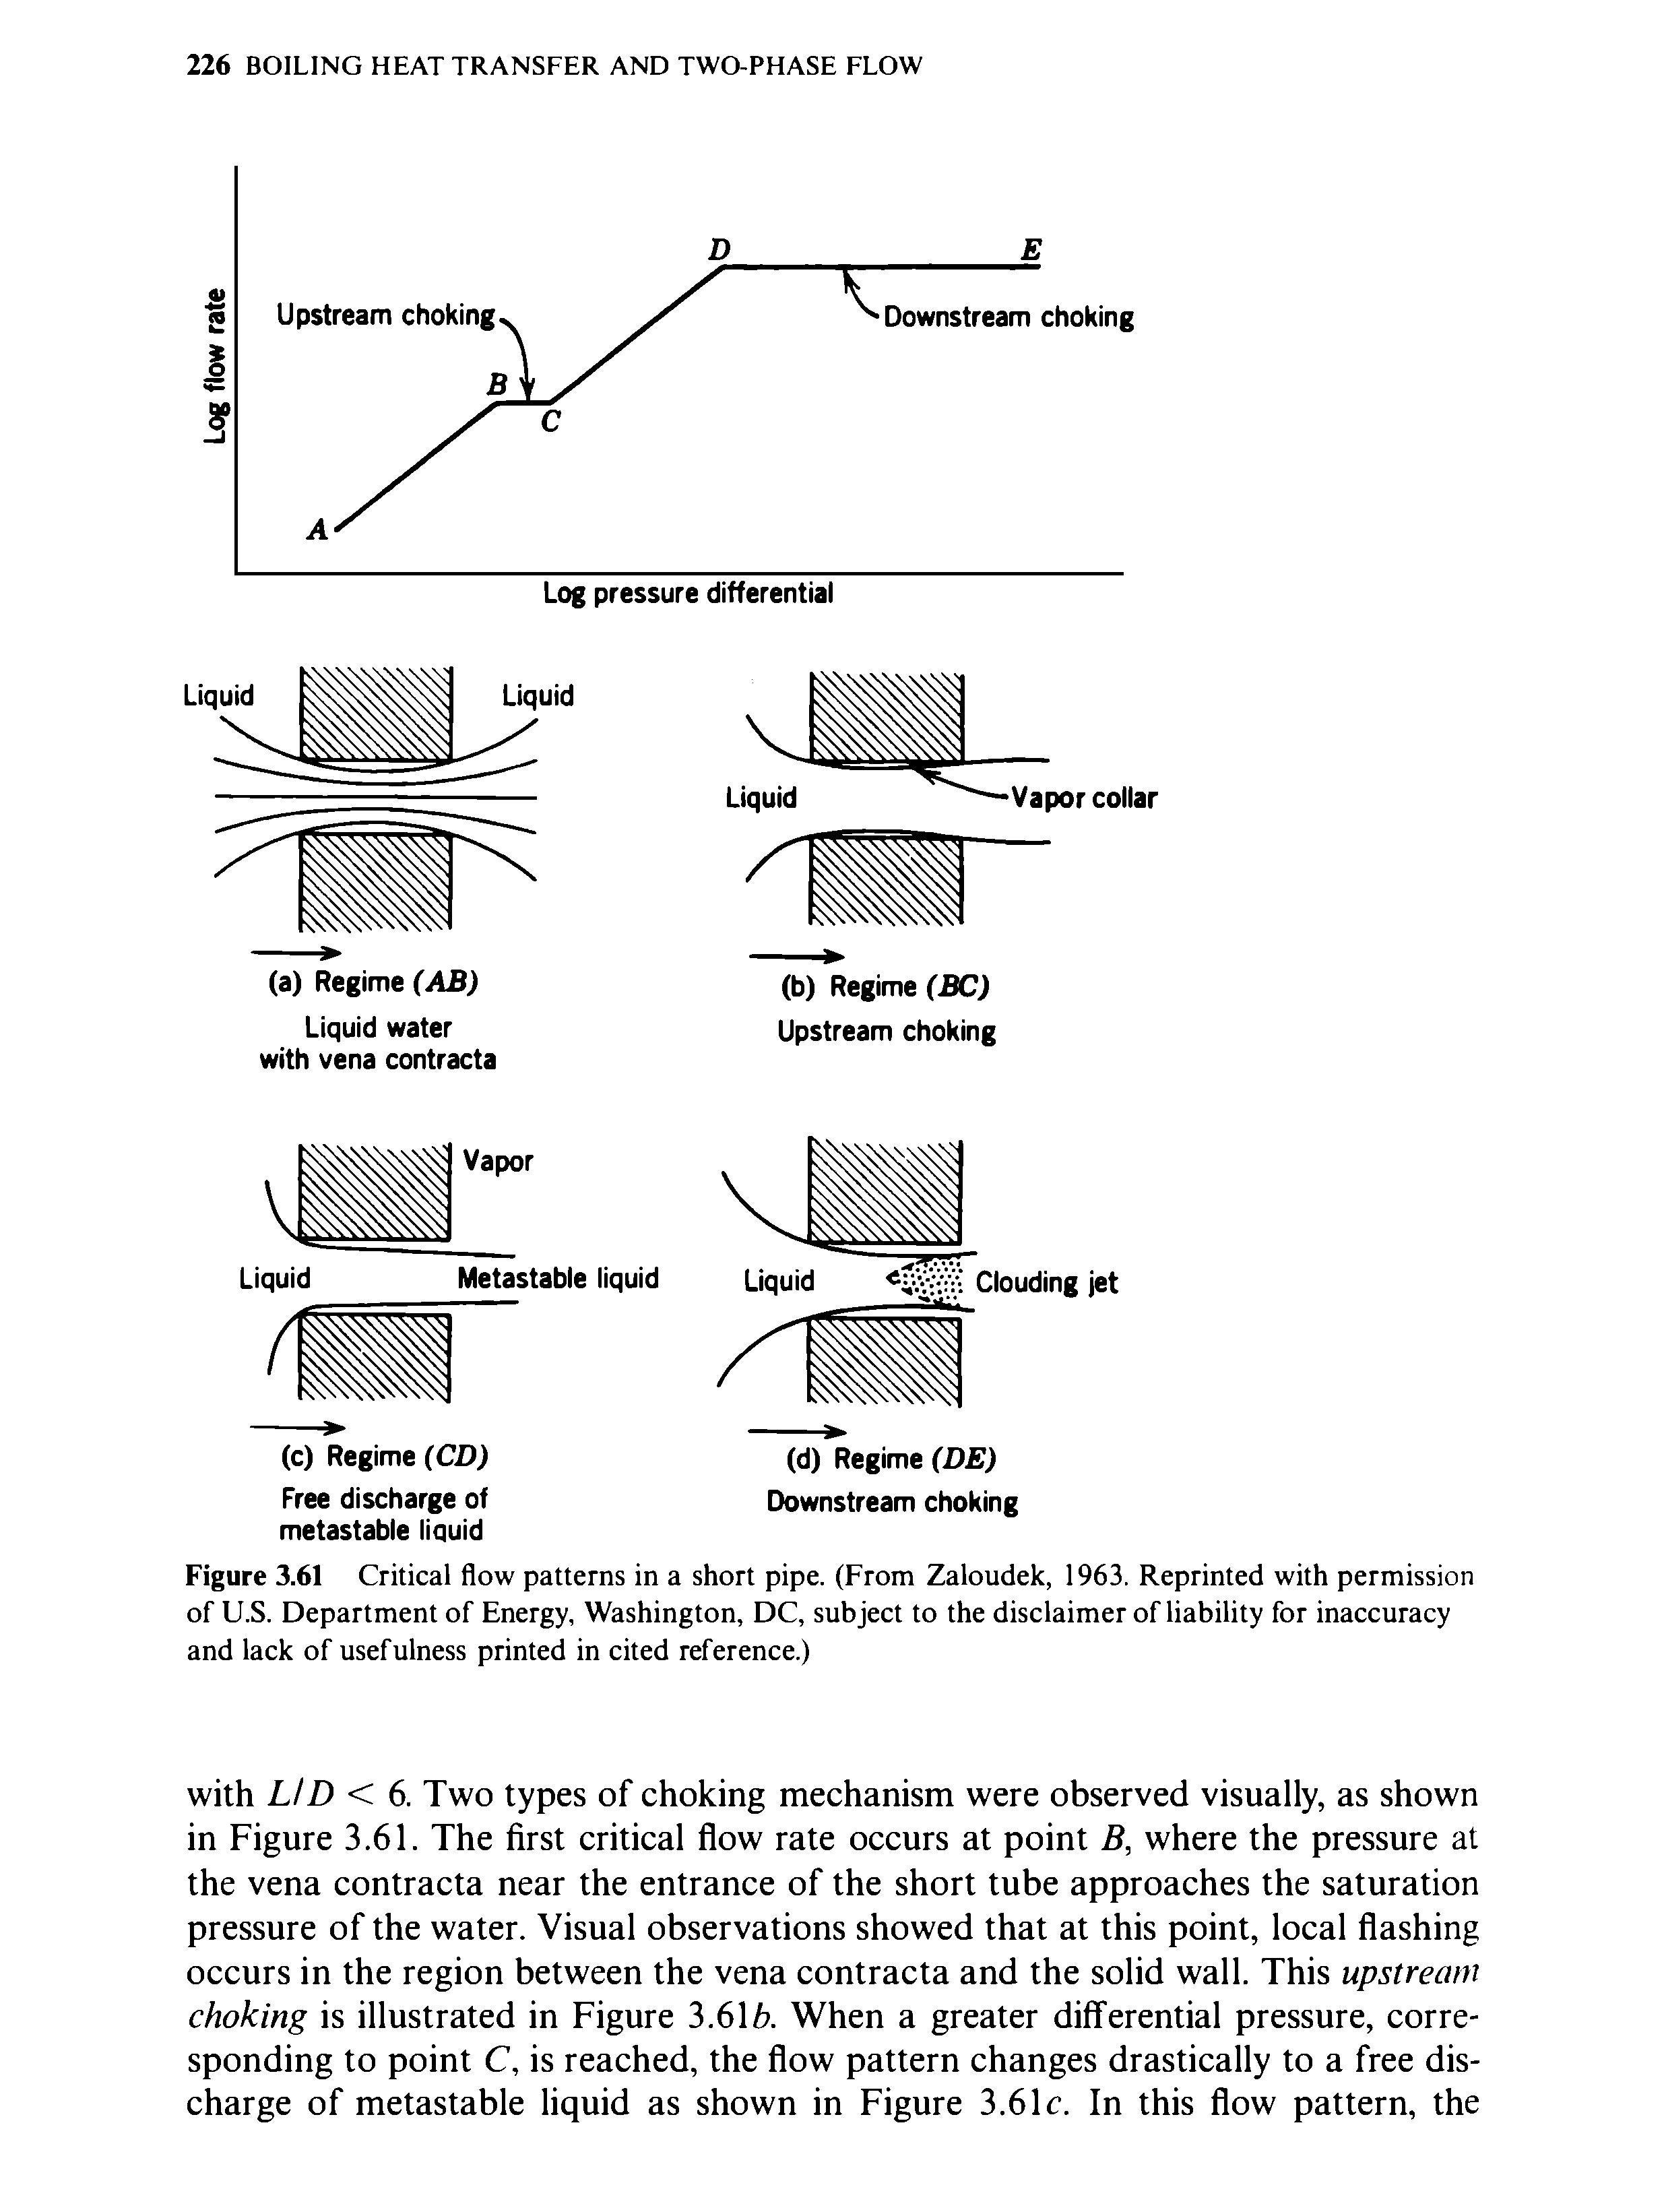 Figure 3.61 Critical flow patterns in a short pipe. (From Zaloudek, 1963. Reprinted with permission of U.S. Department of Energy, Washington, DC, subject to the disclaimer of liability for inaccuracy and lack of usefulness printed in cited reference.)...